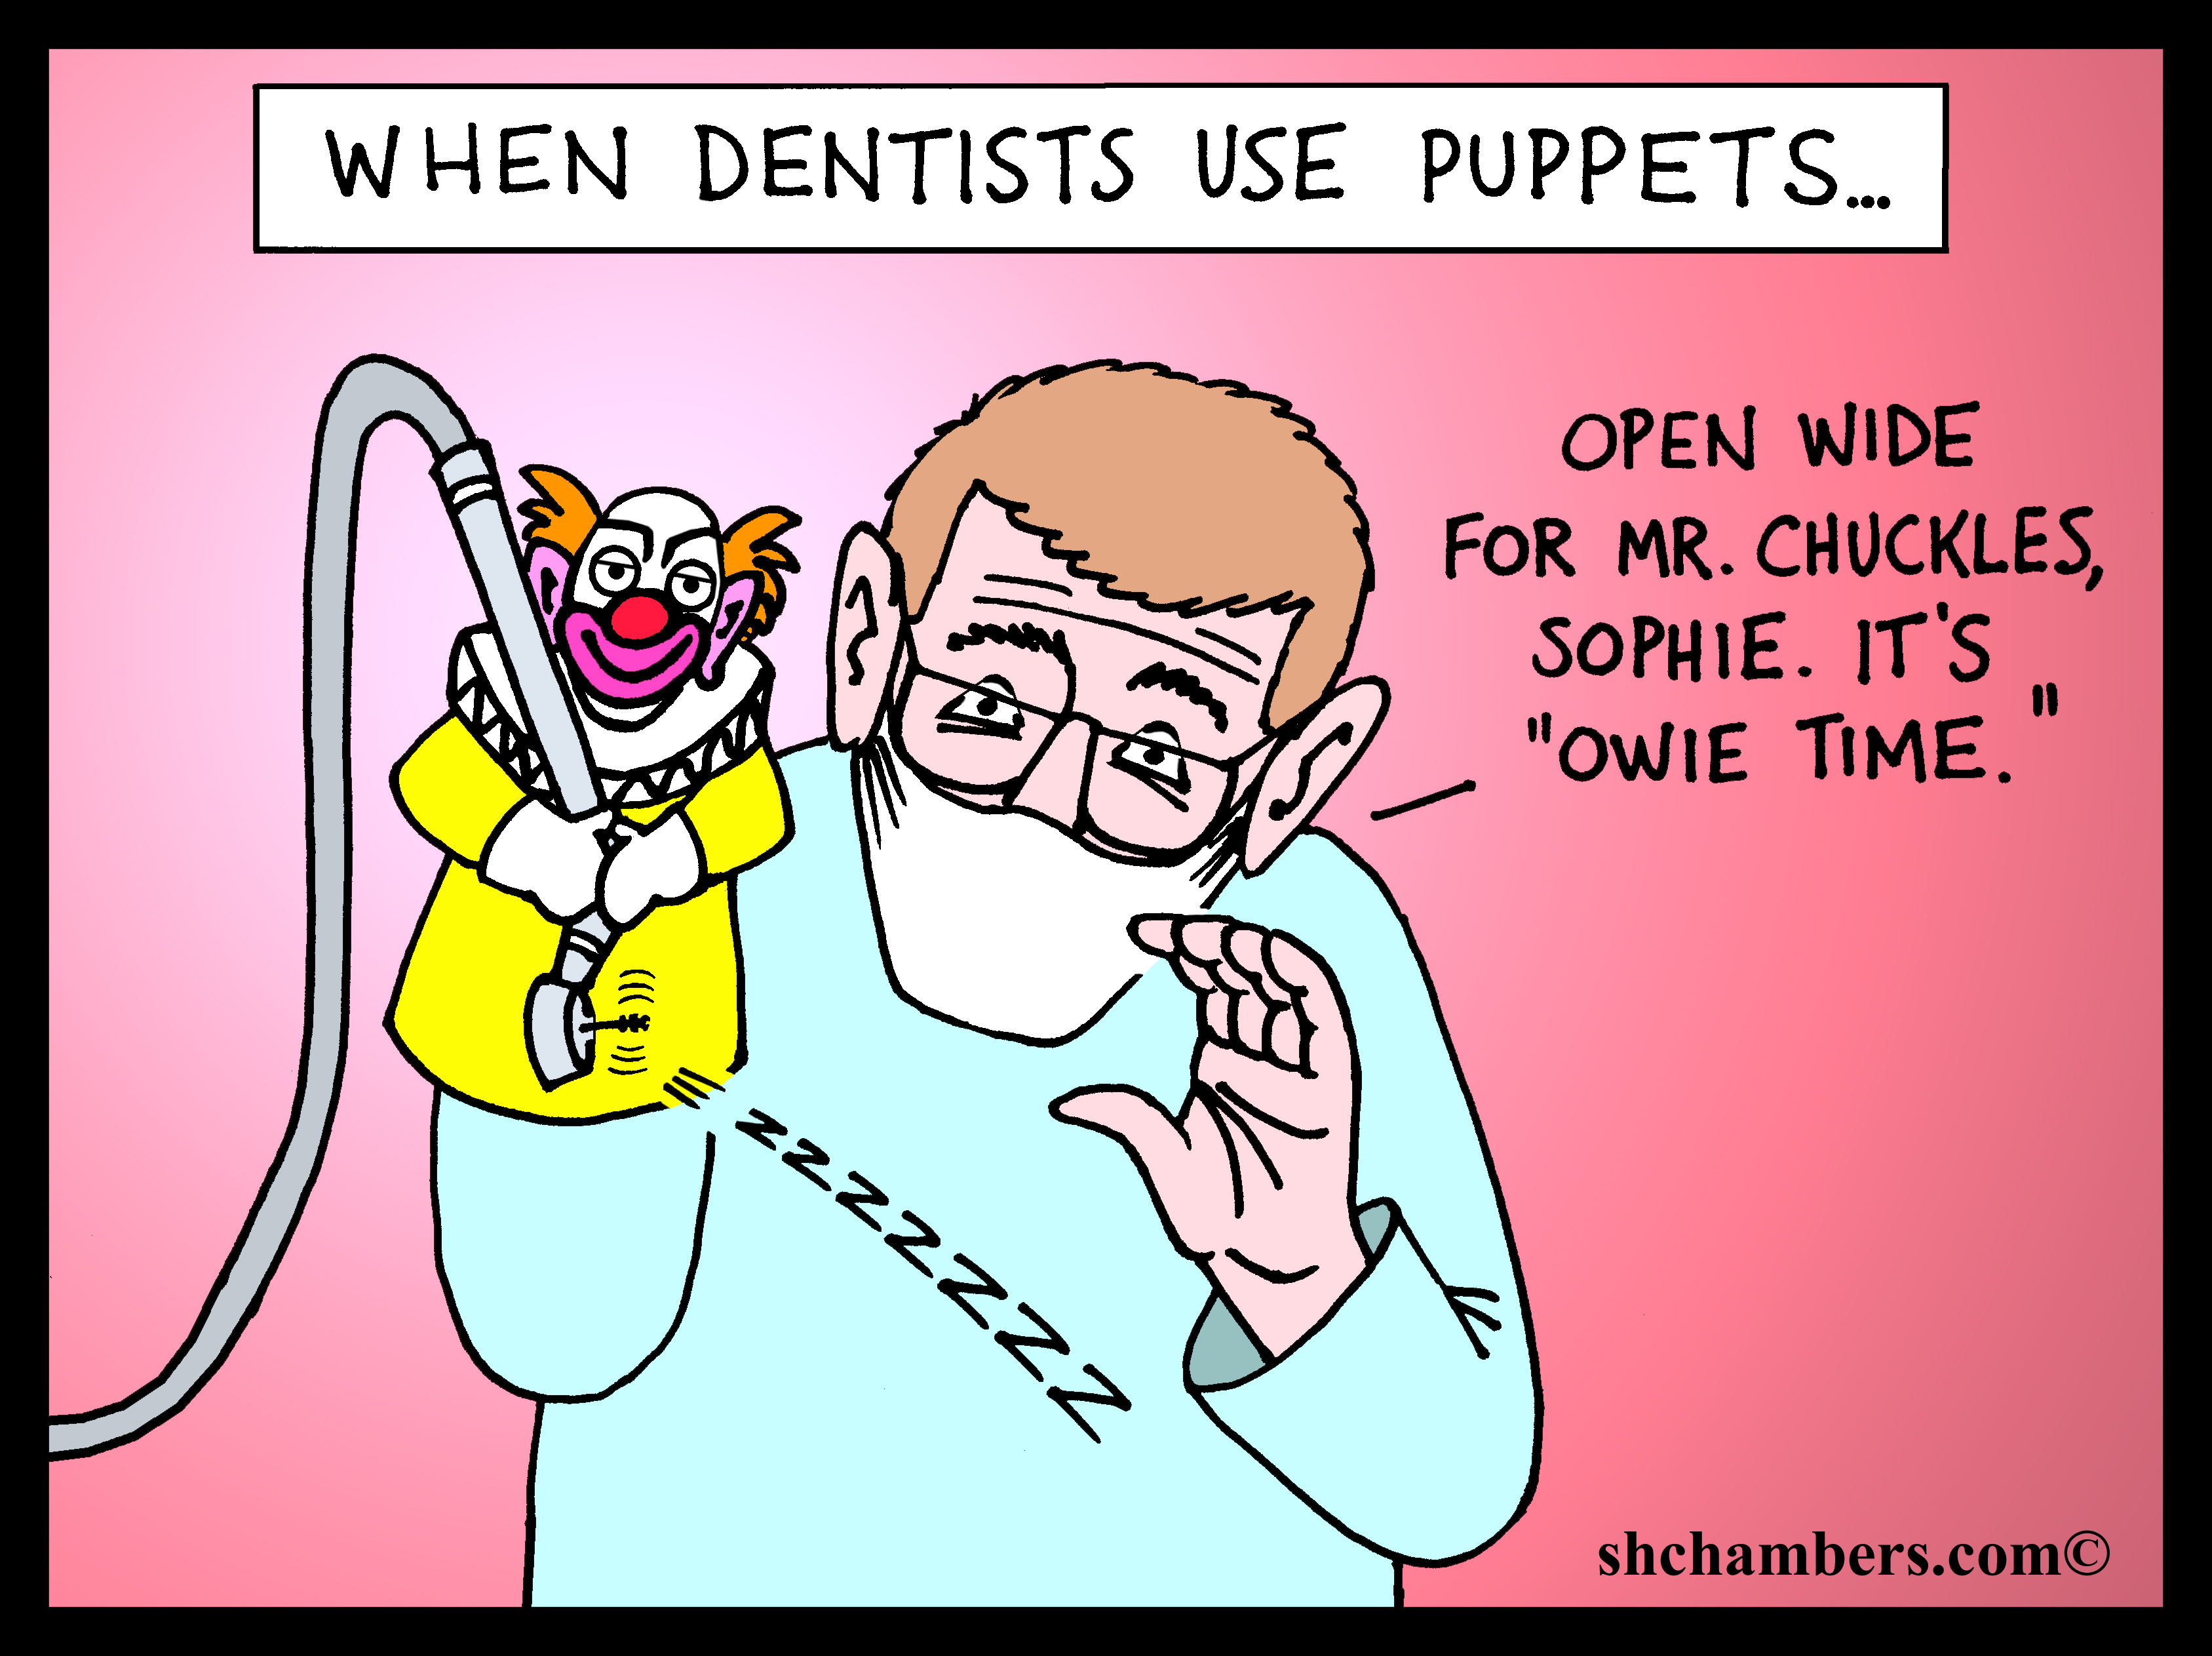 Anything that can be done to make a child's dental visit less frightening should be done.